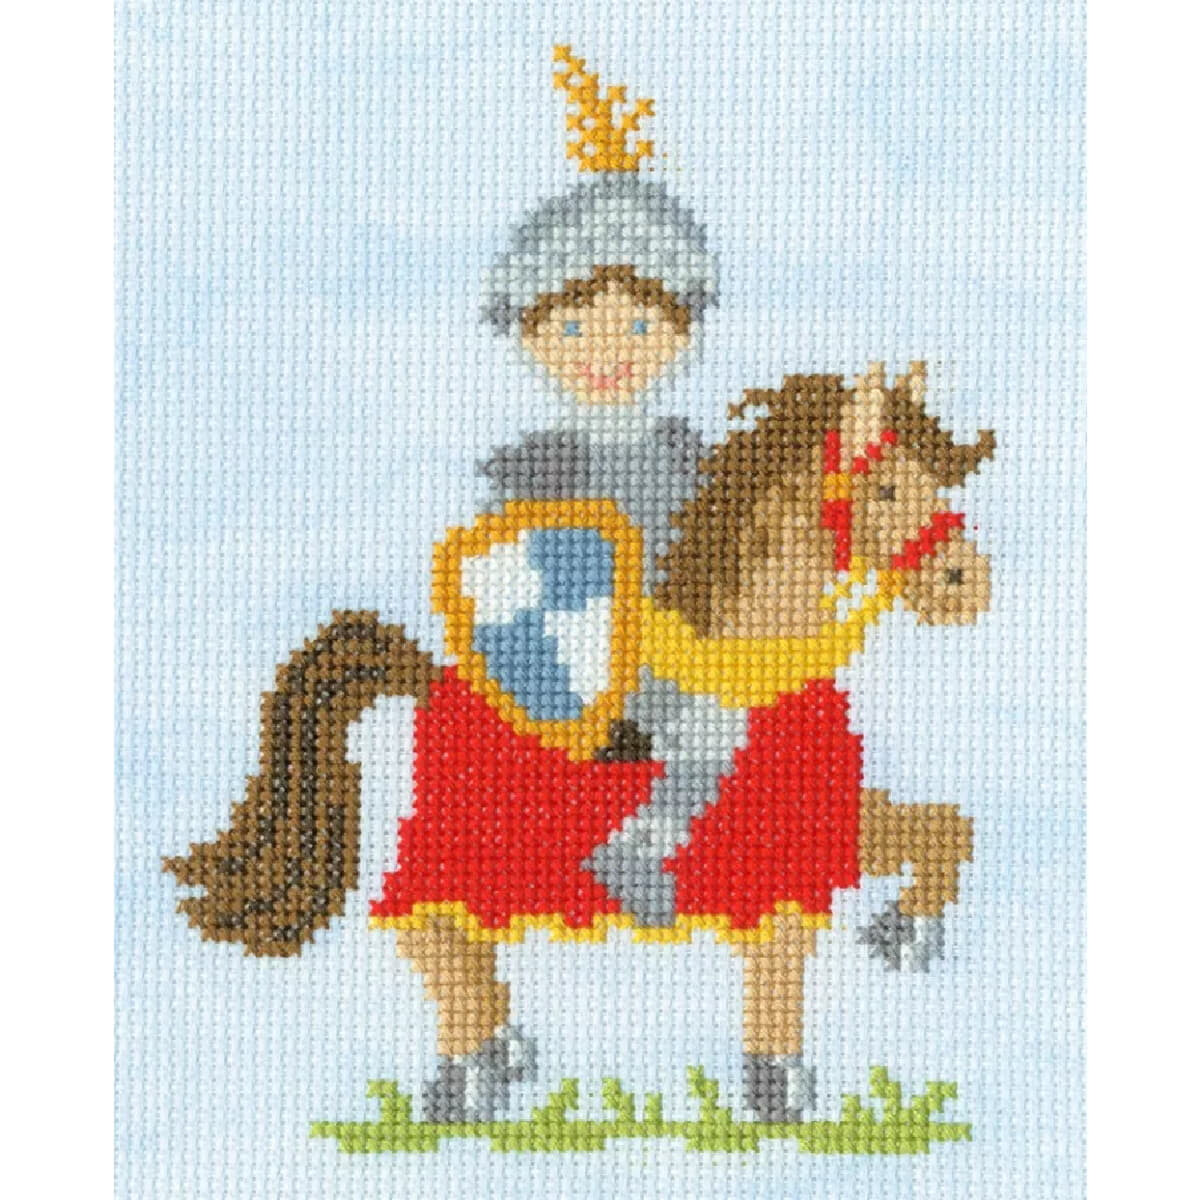 A Bothy Threads embroidery pack shows a knight in silver...